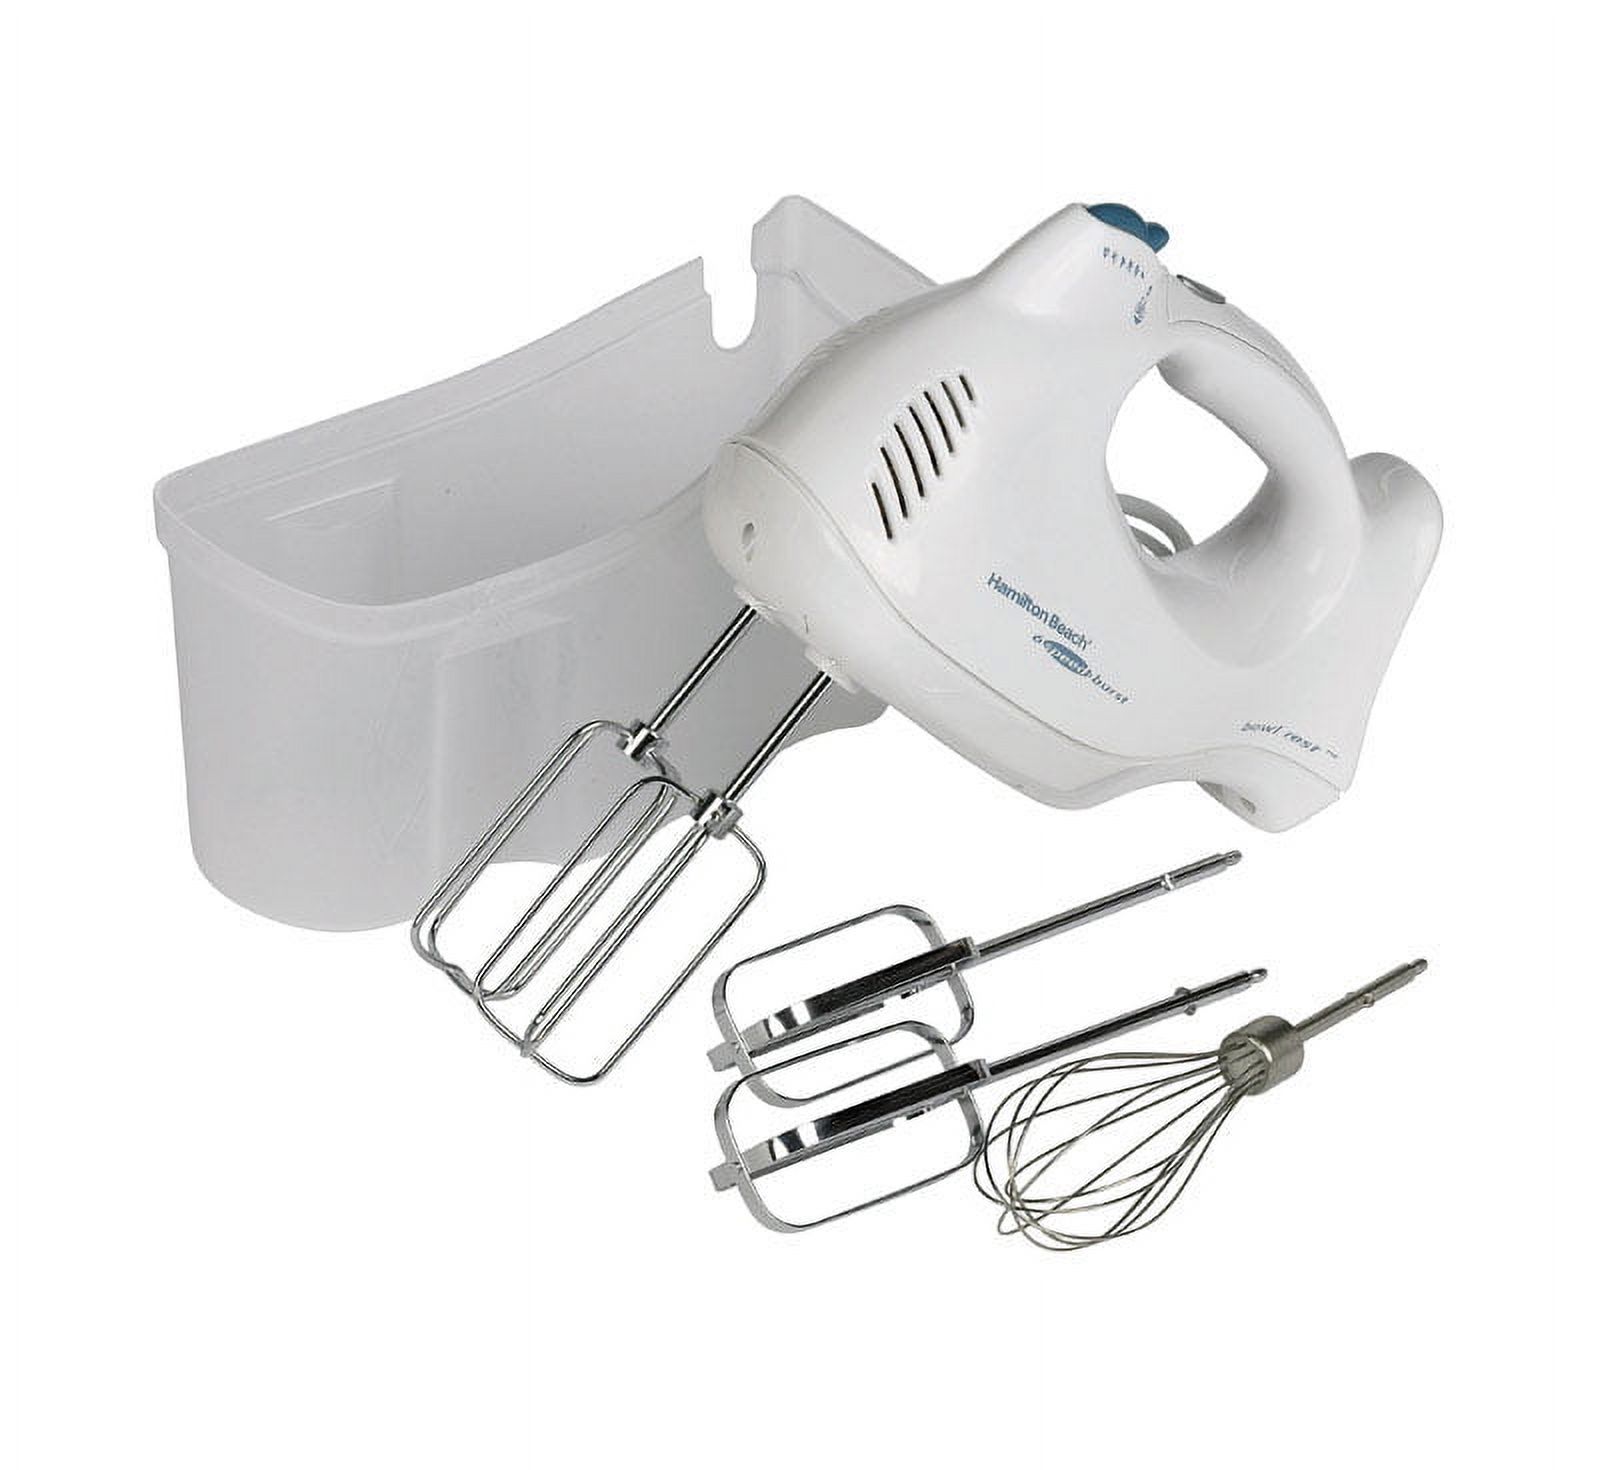 Hamilton Beach 6 Speed Hand Mixer with Snap-On Case, 3 Attachments, QuickBurst, White, 62695V - image 1 of 8